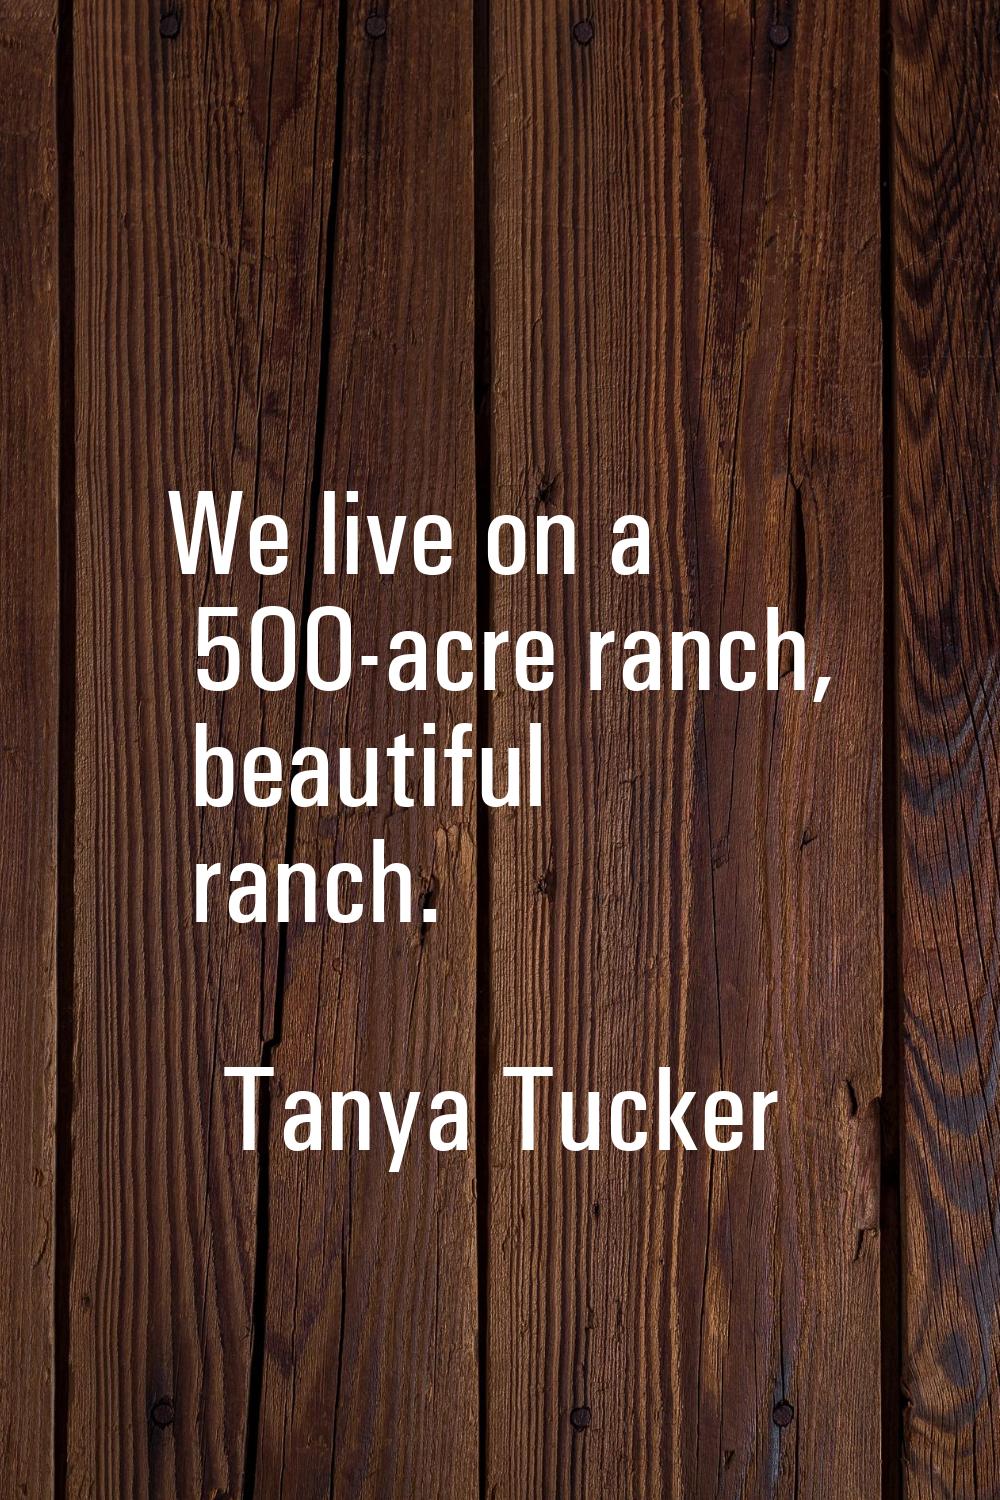 We live on a 500-acre ranch, beautiful ranch.